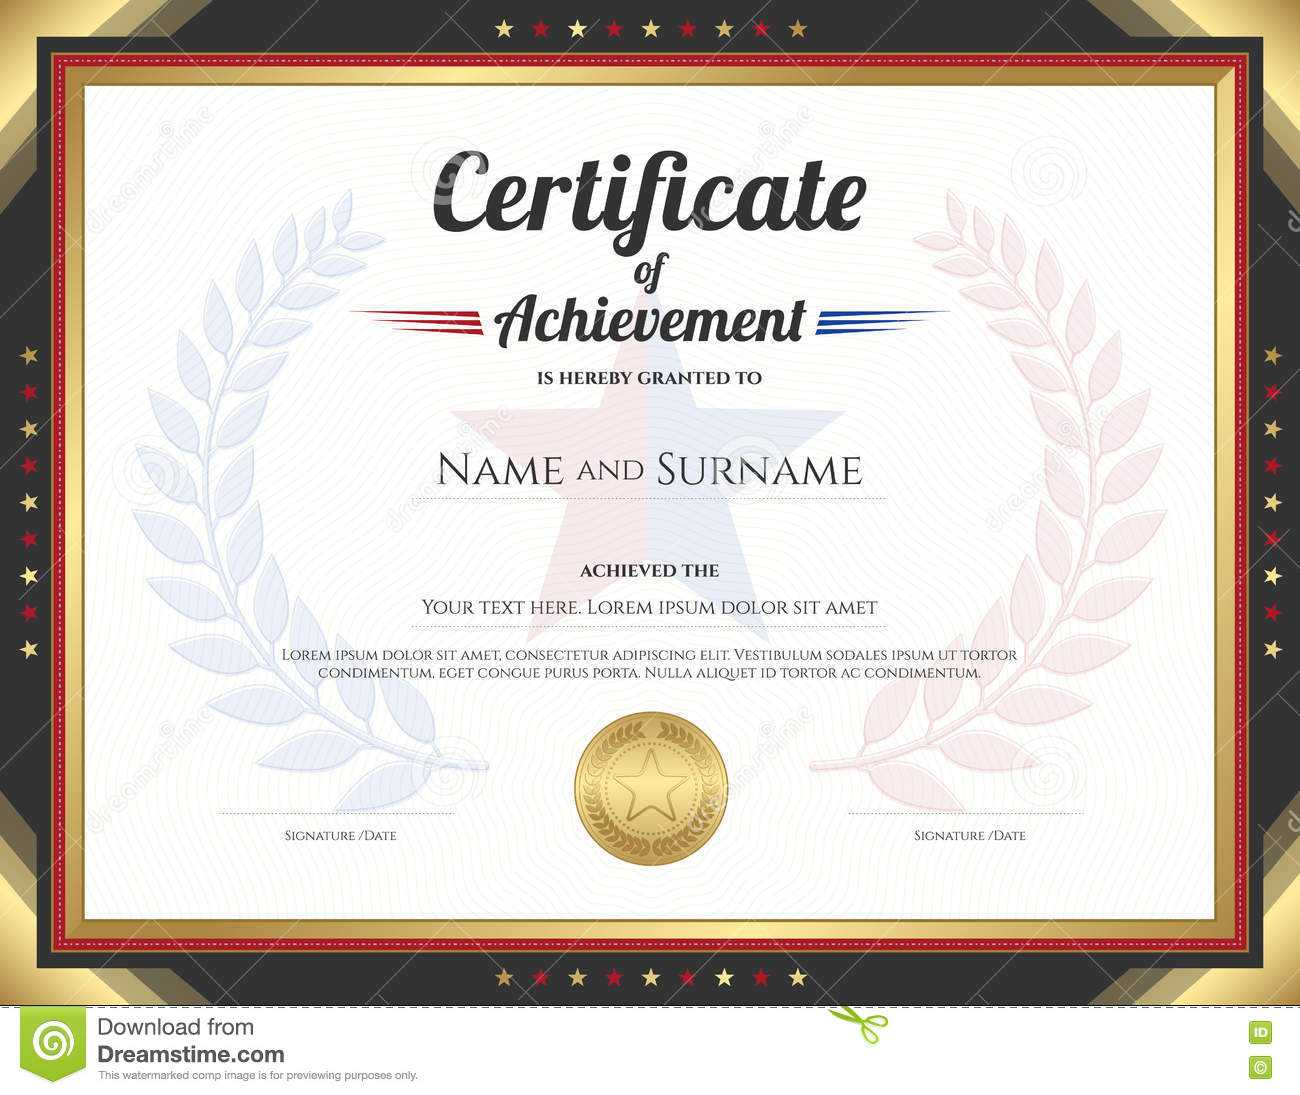 Certificate Of Achievement Template With Gold Border Theme In Certificate Of Accomplishment Template Free